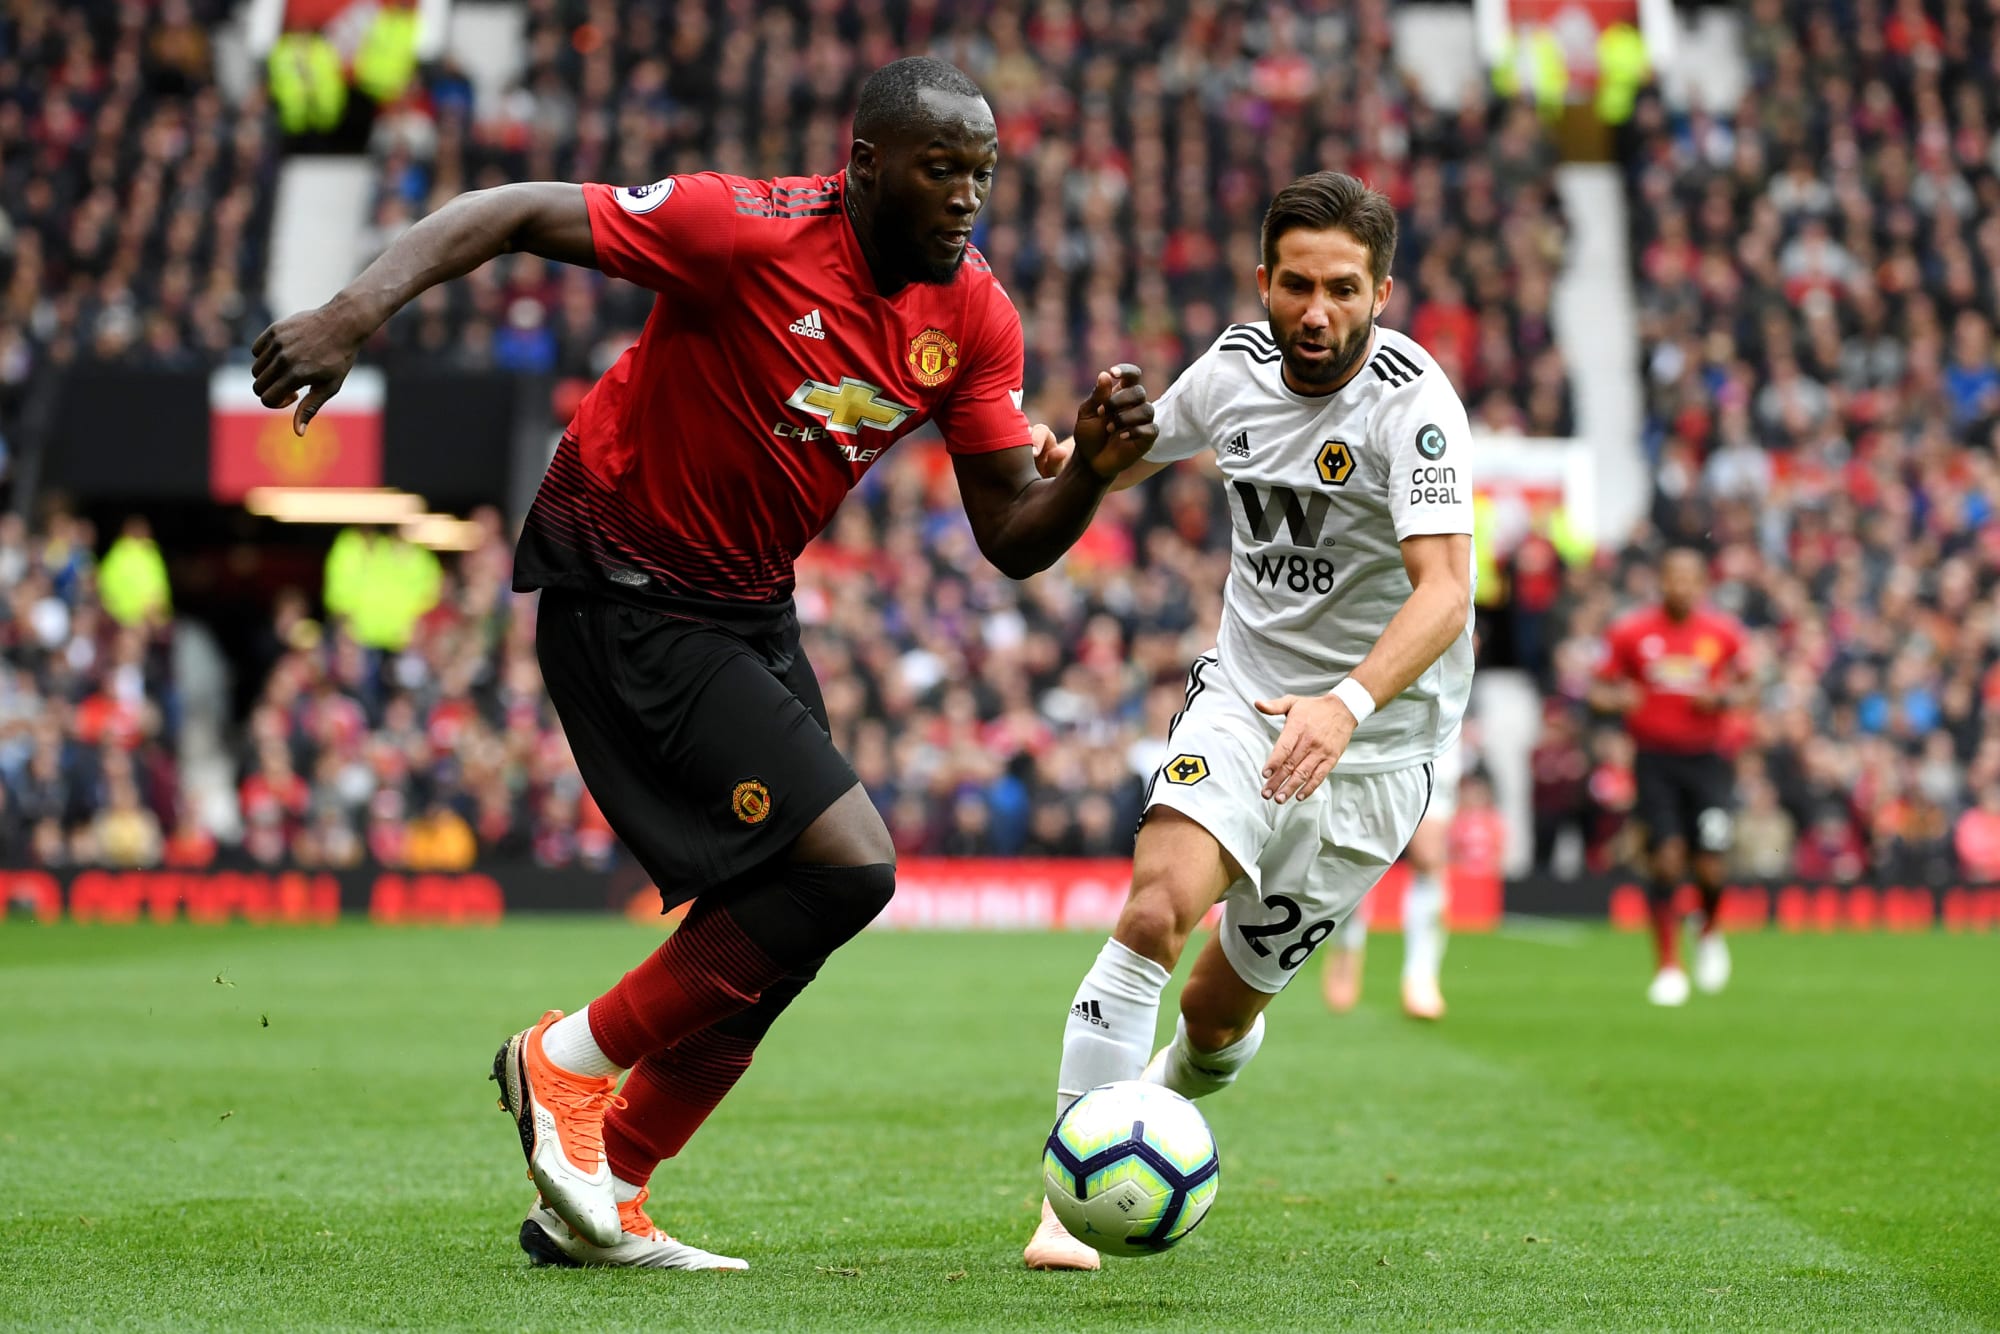 How Romelu Lukaku compares to other strikers in the Premier League